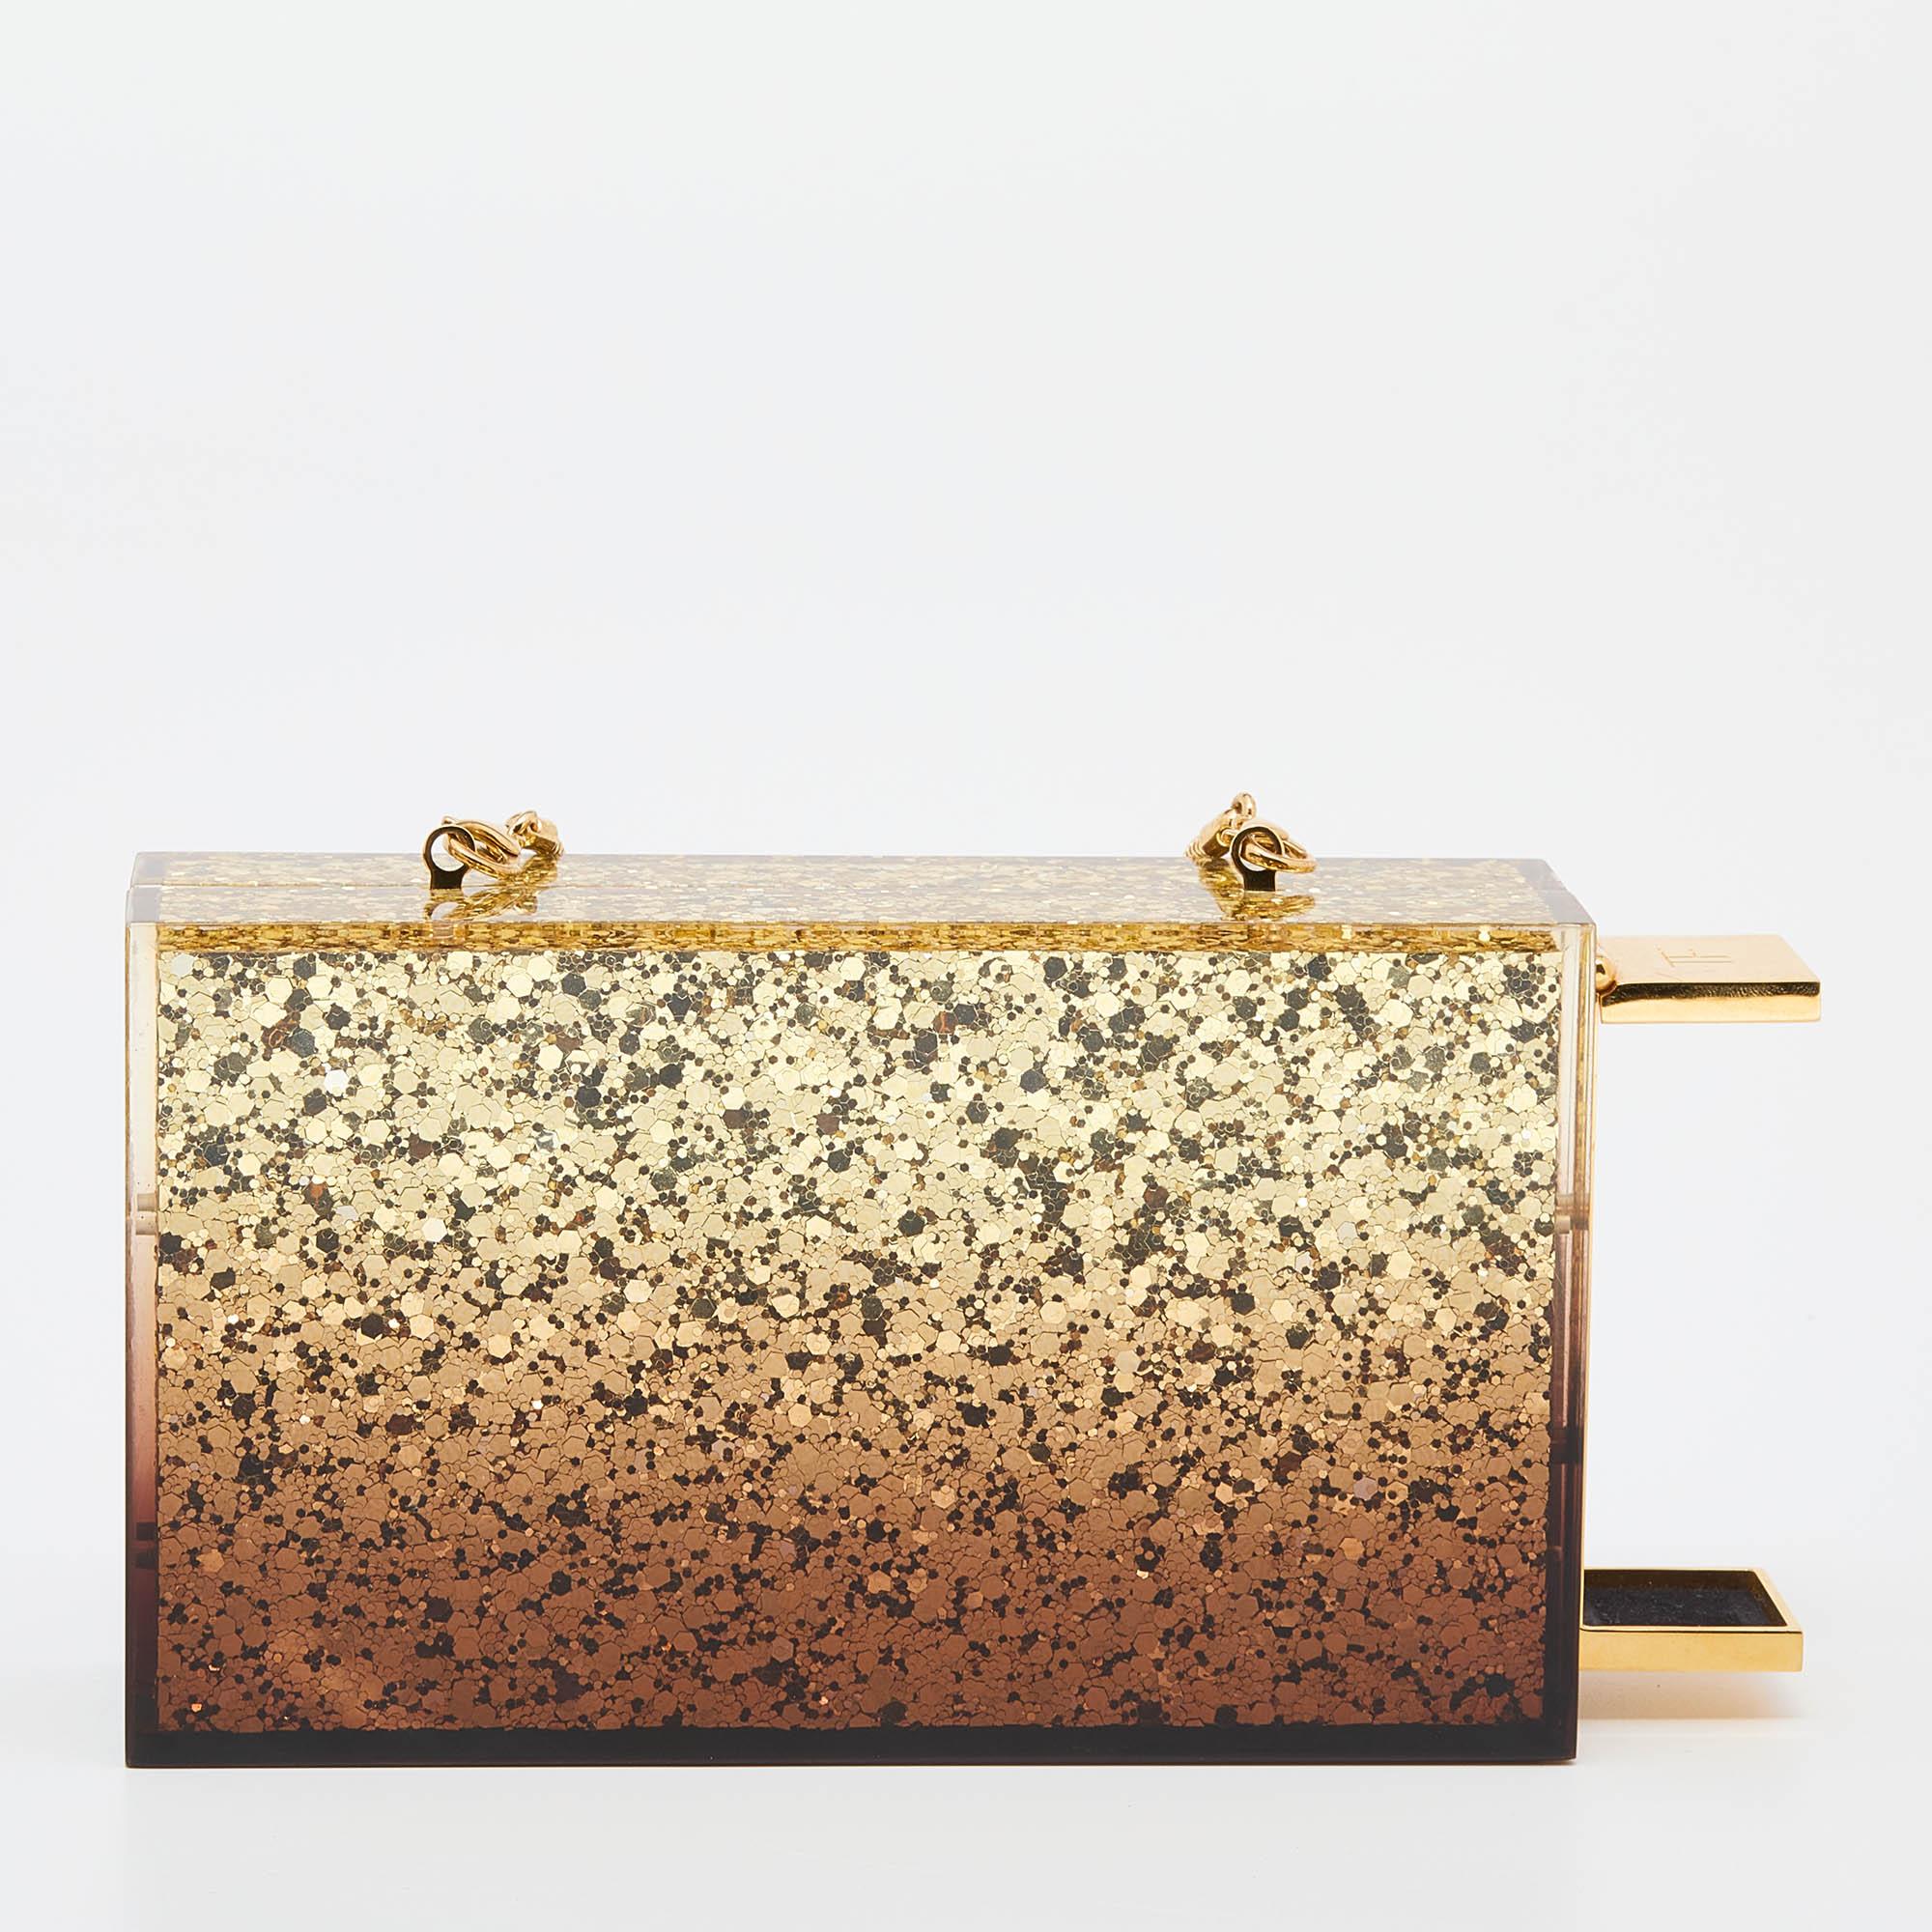 Carry this metallic gold beauty in style. Coming from Tom Ford, this stunning clutch is made from plexiglass and is equipped with a sizeable interior. The structured, artistic clutch features an ombre effect and a slender, gold-tone shoulder strap.

